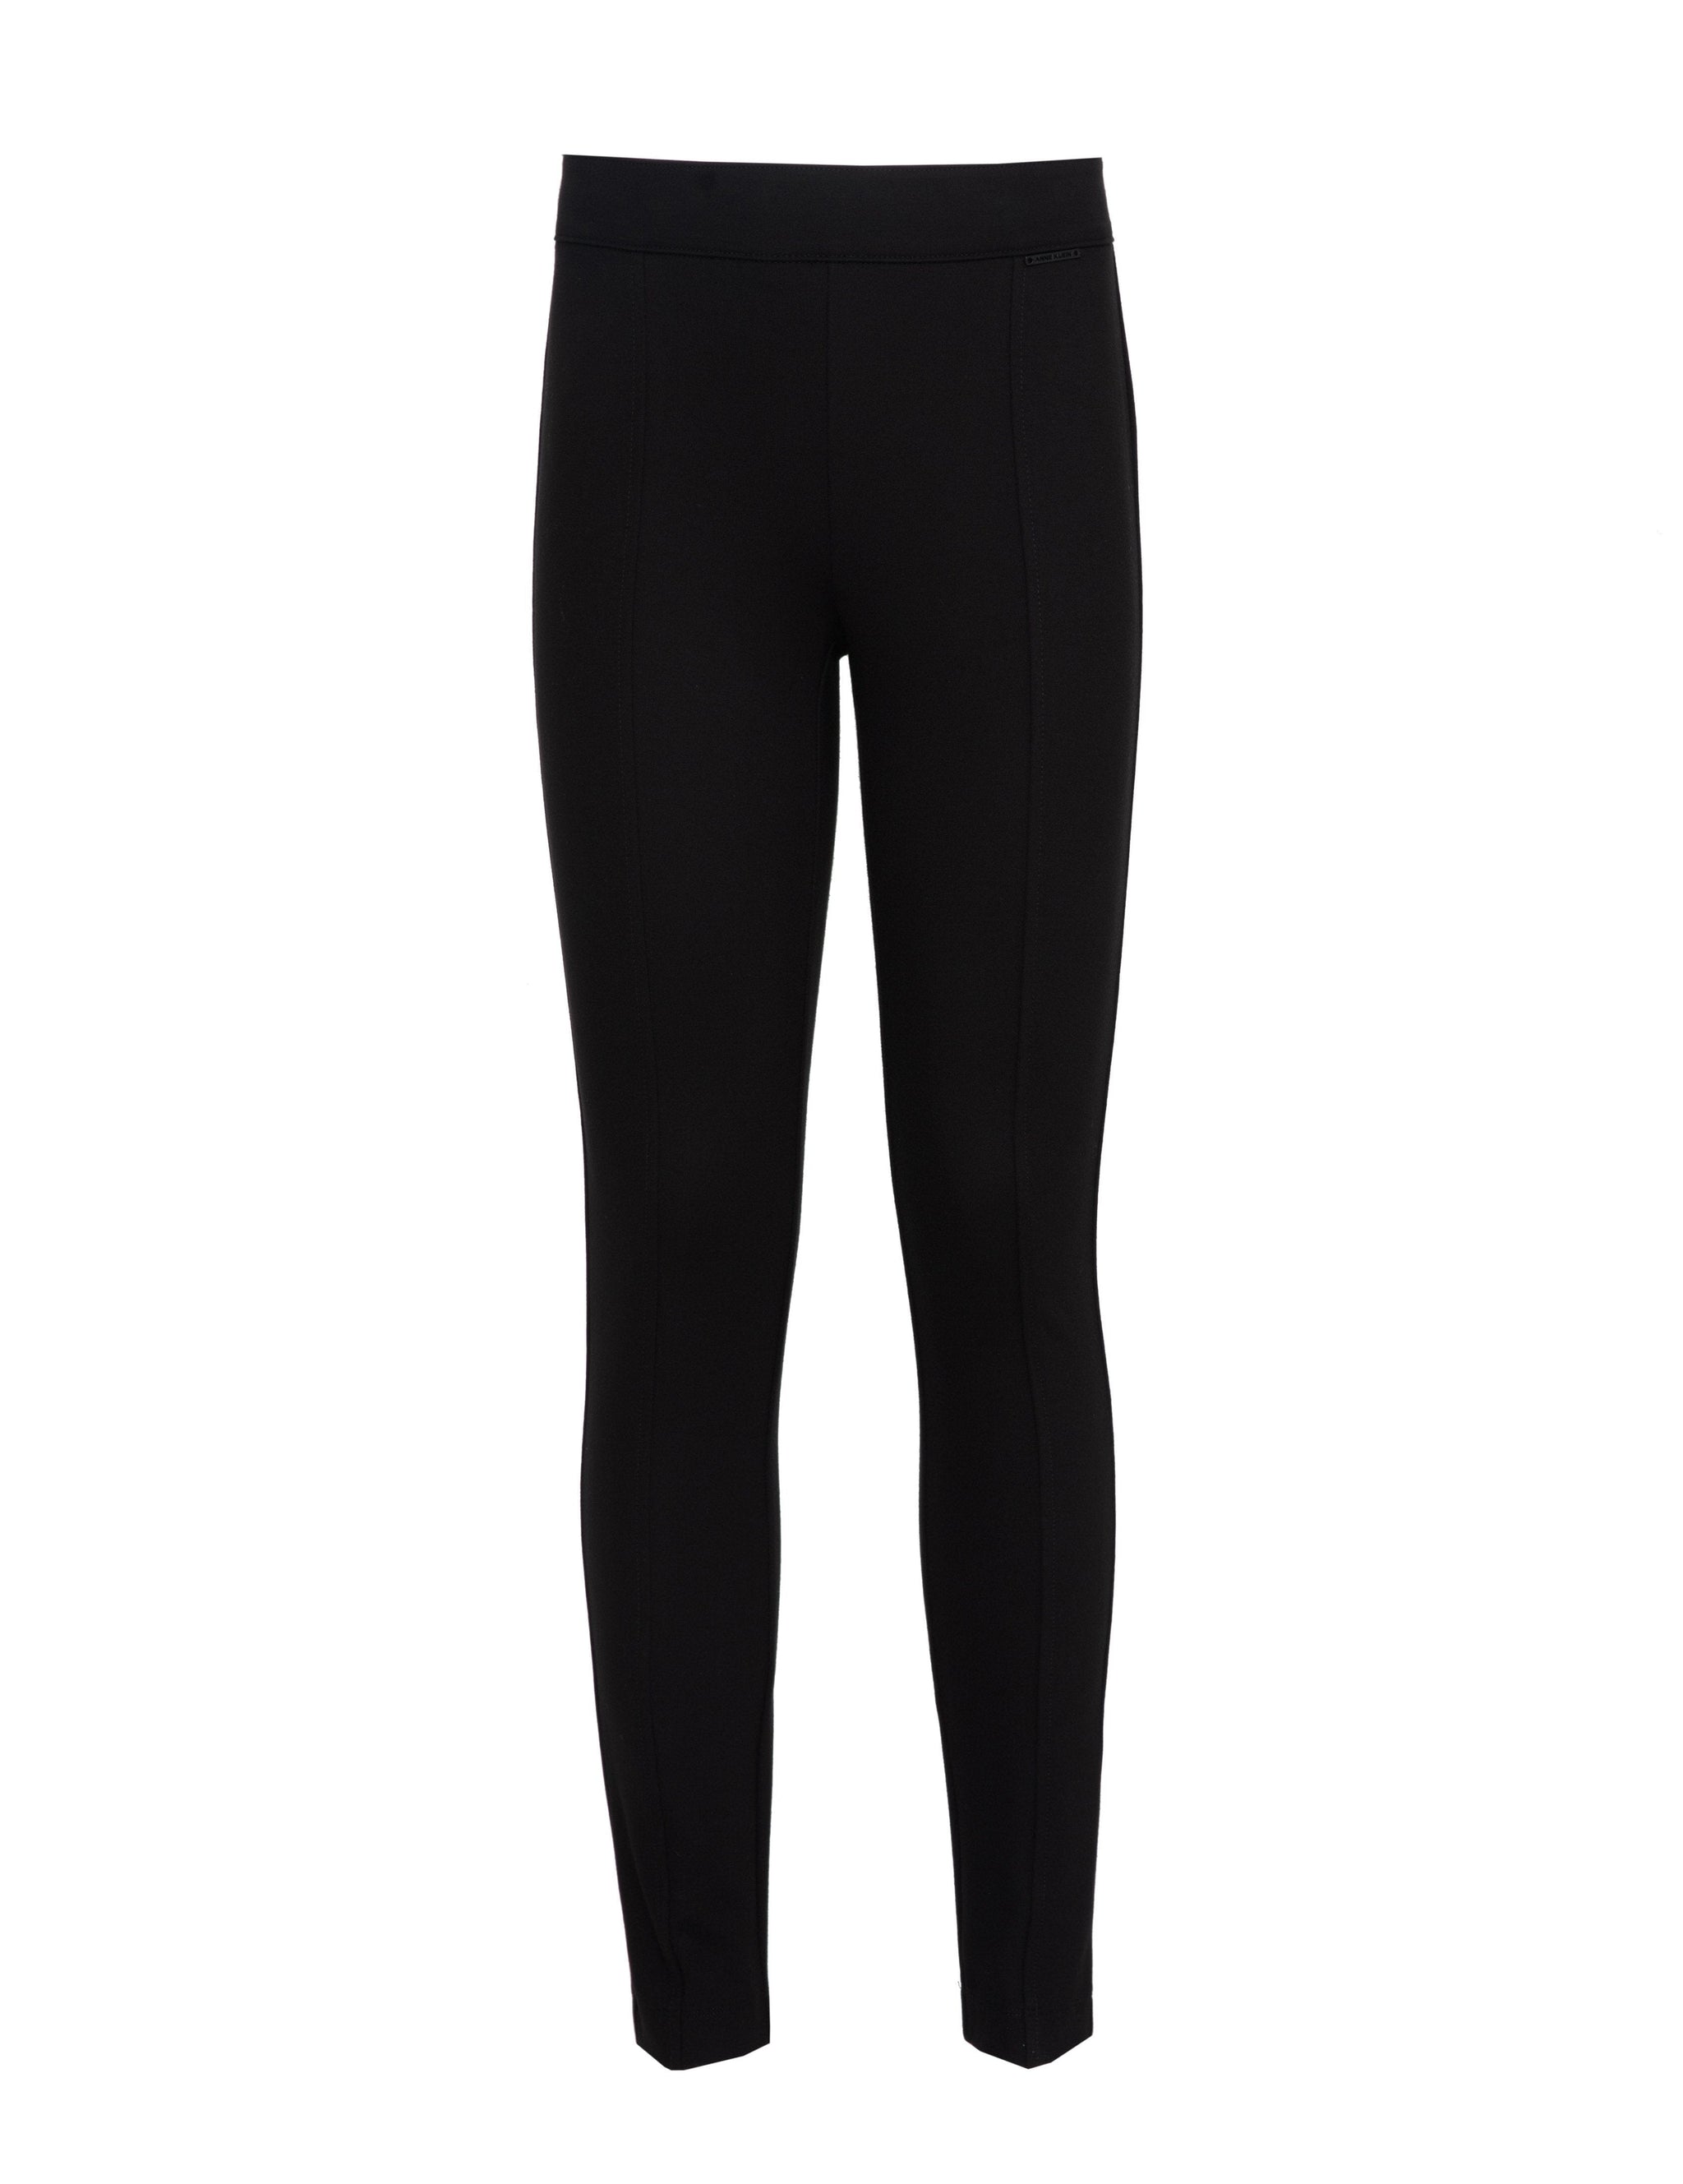 Buy Aapre Skinny Fit Solid Ankle Length Stretchable PantHigh Waist Black  Jeggings for Women (Small) at